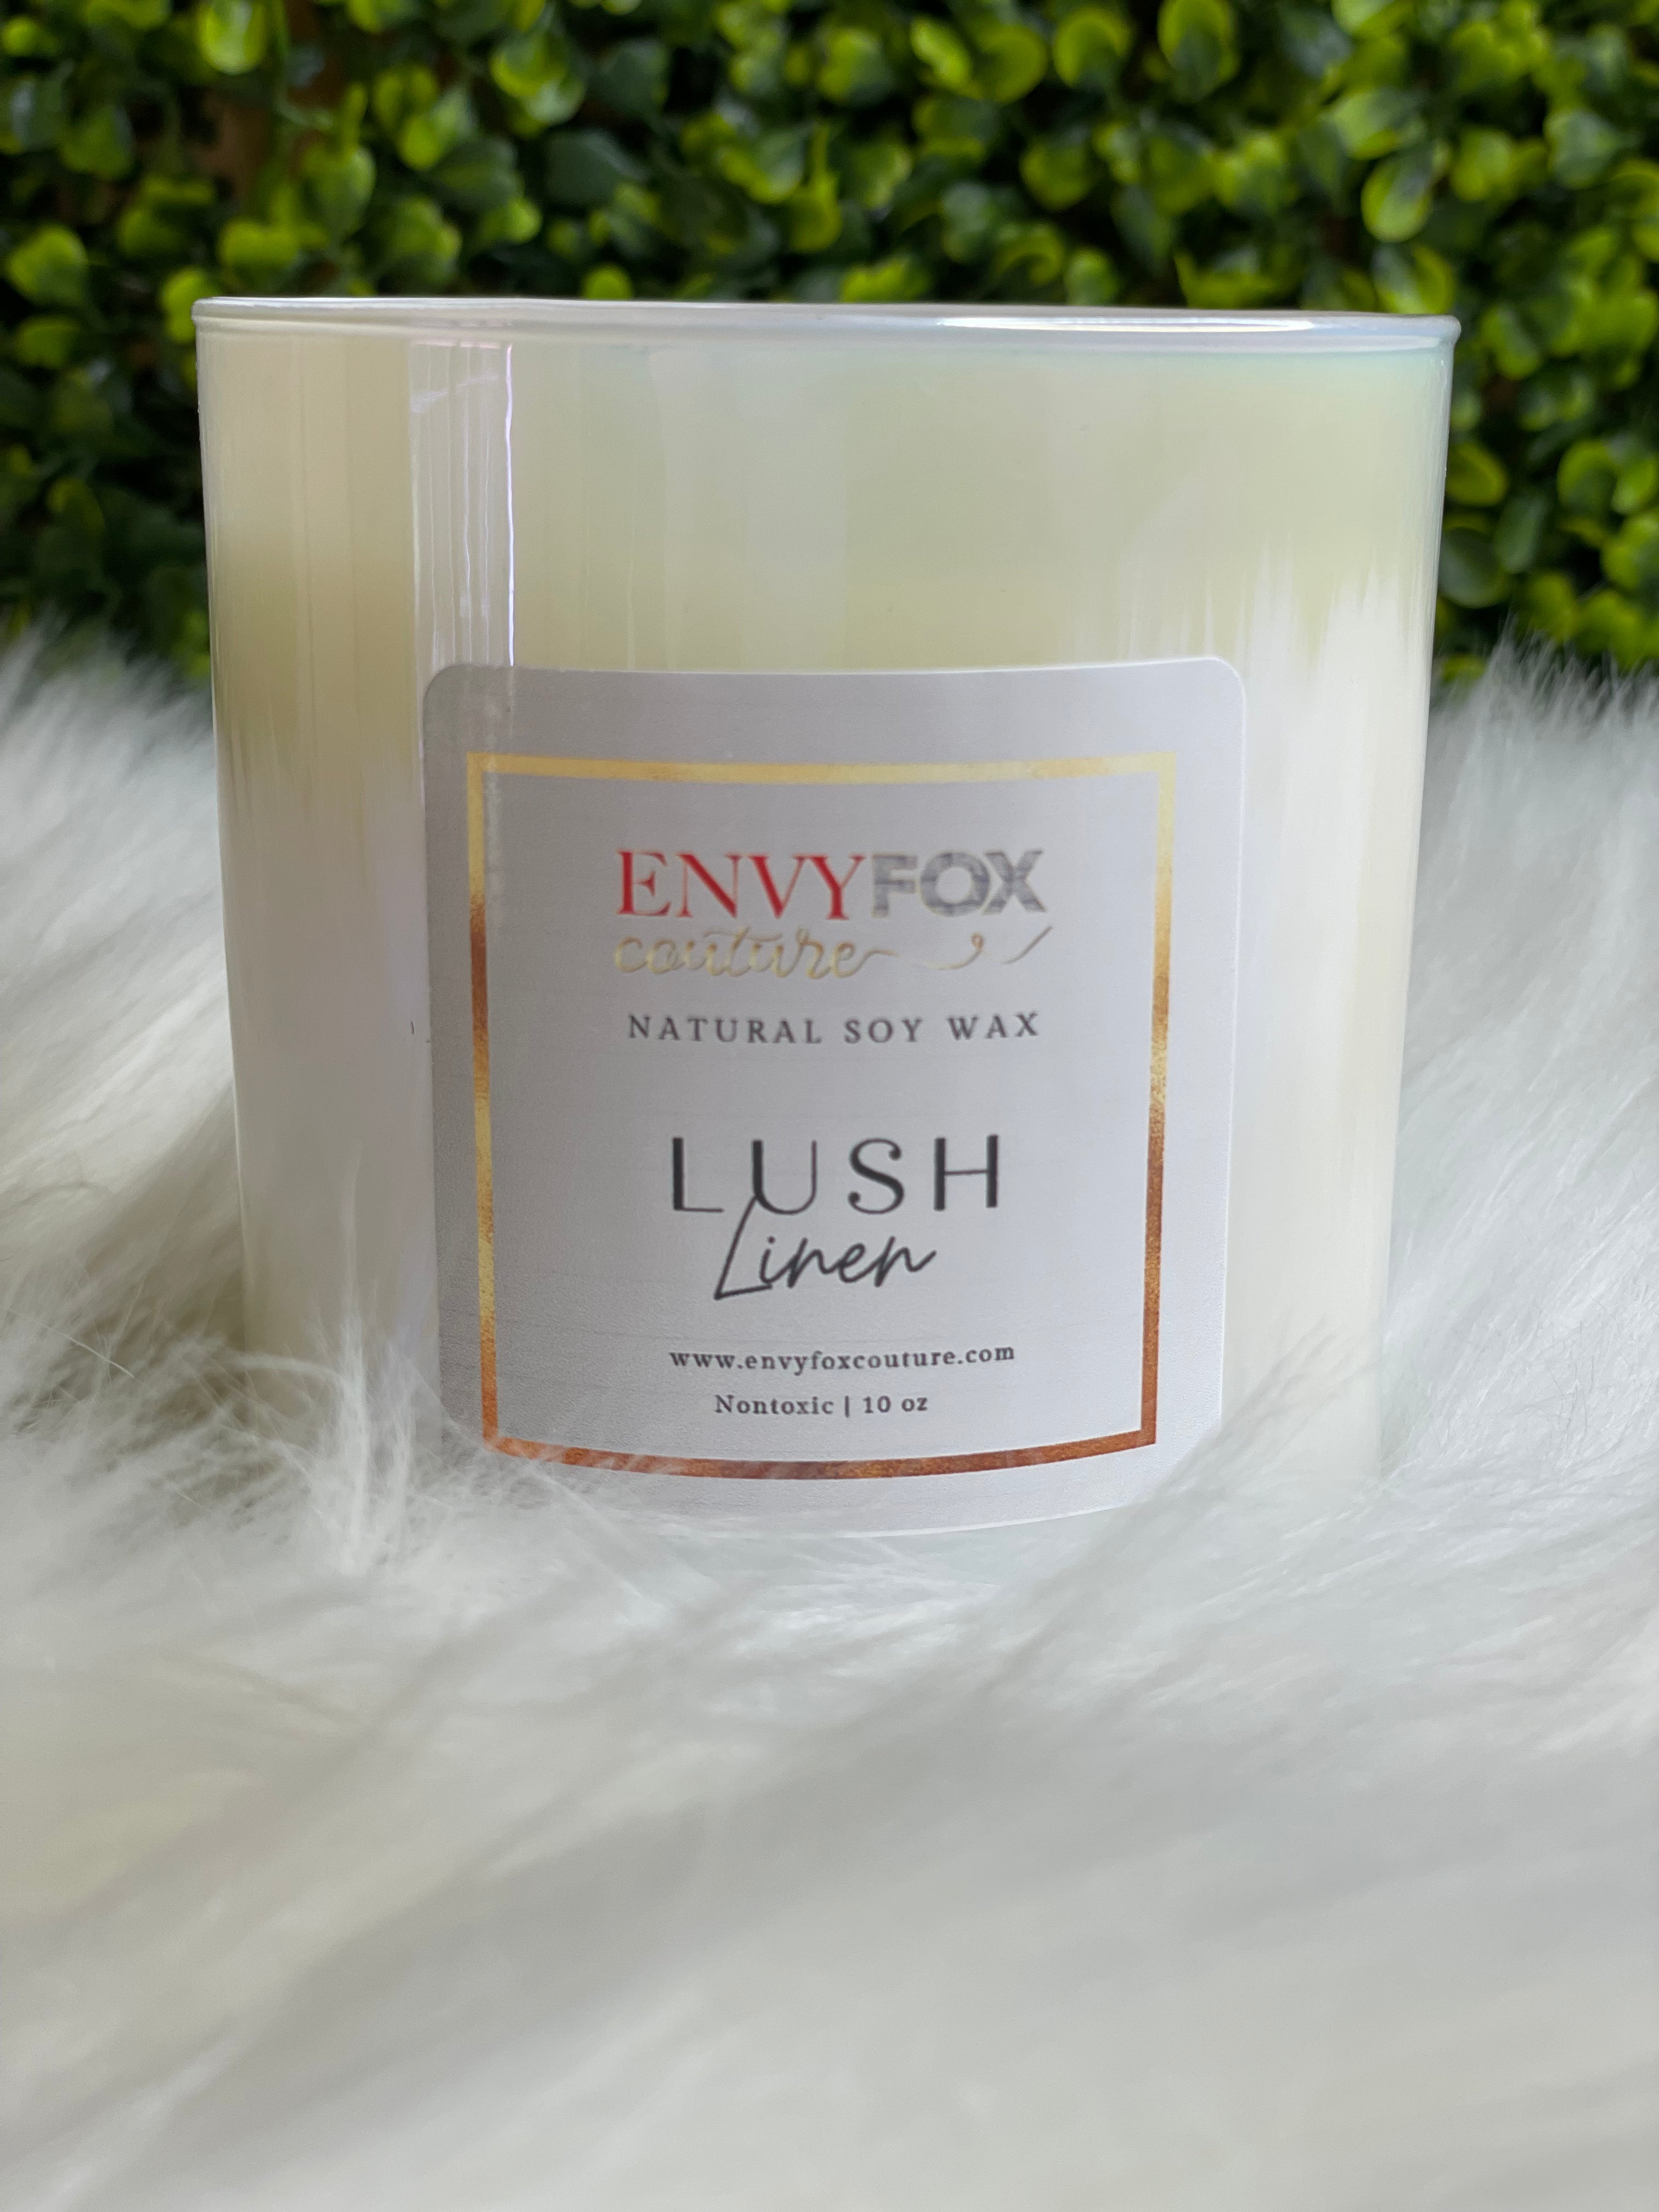 Lush Linen 10 oz Natural Soy Wax Candle